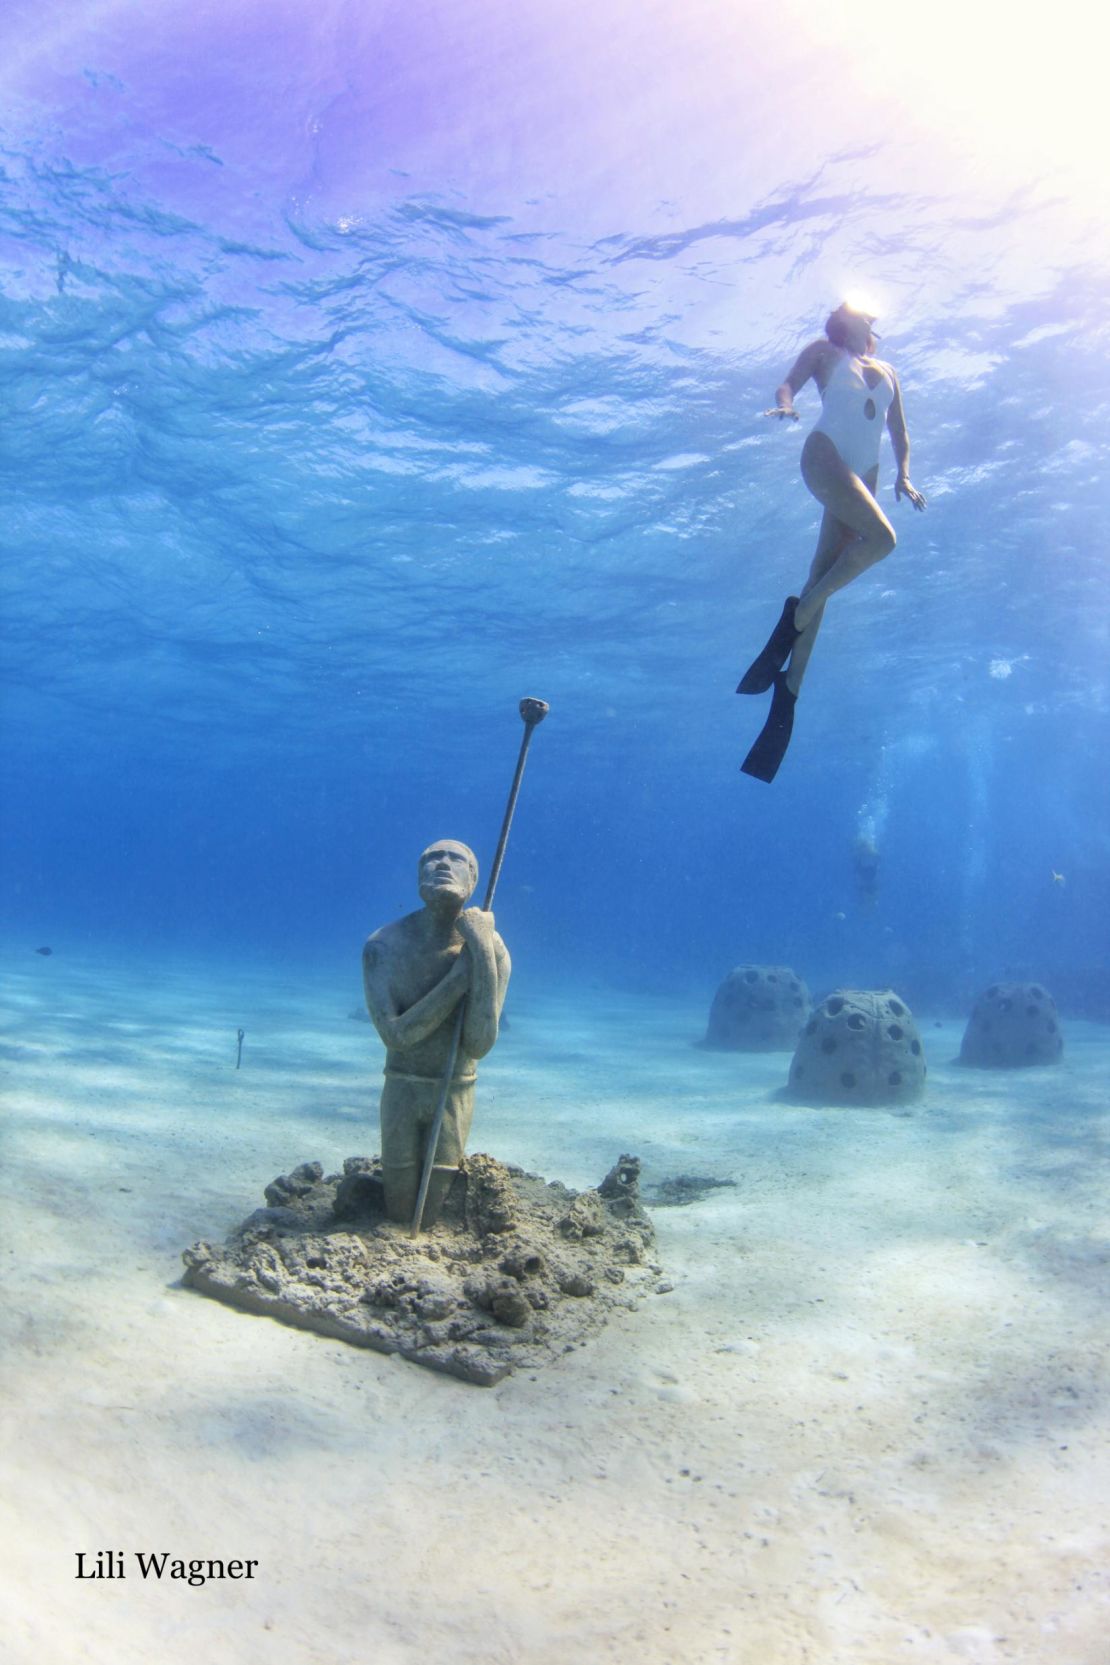 "Virtuoso Man" by artist Willicey Tynes is another sculpture in the underwater park